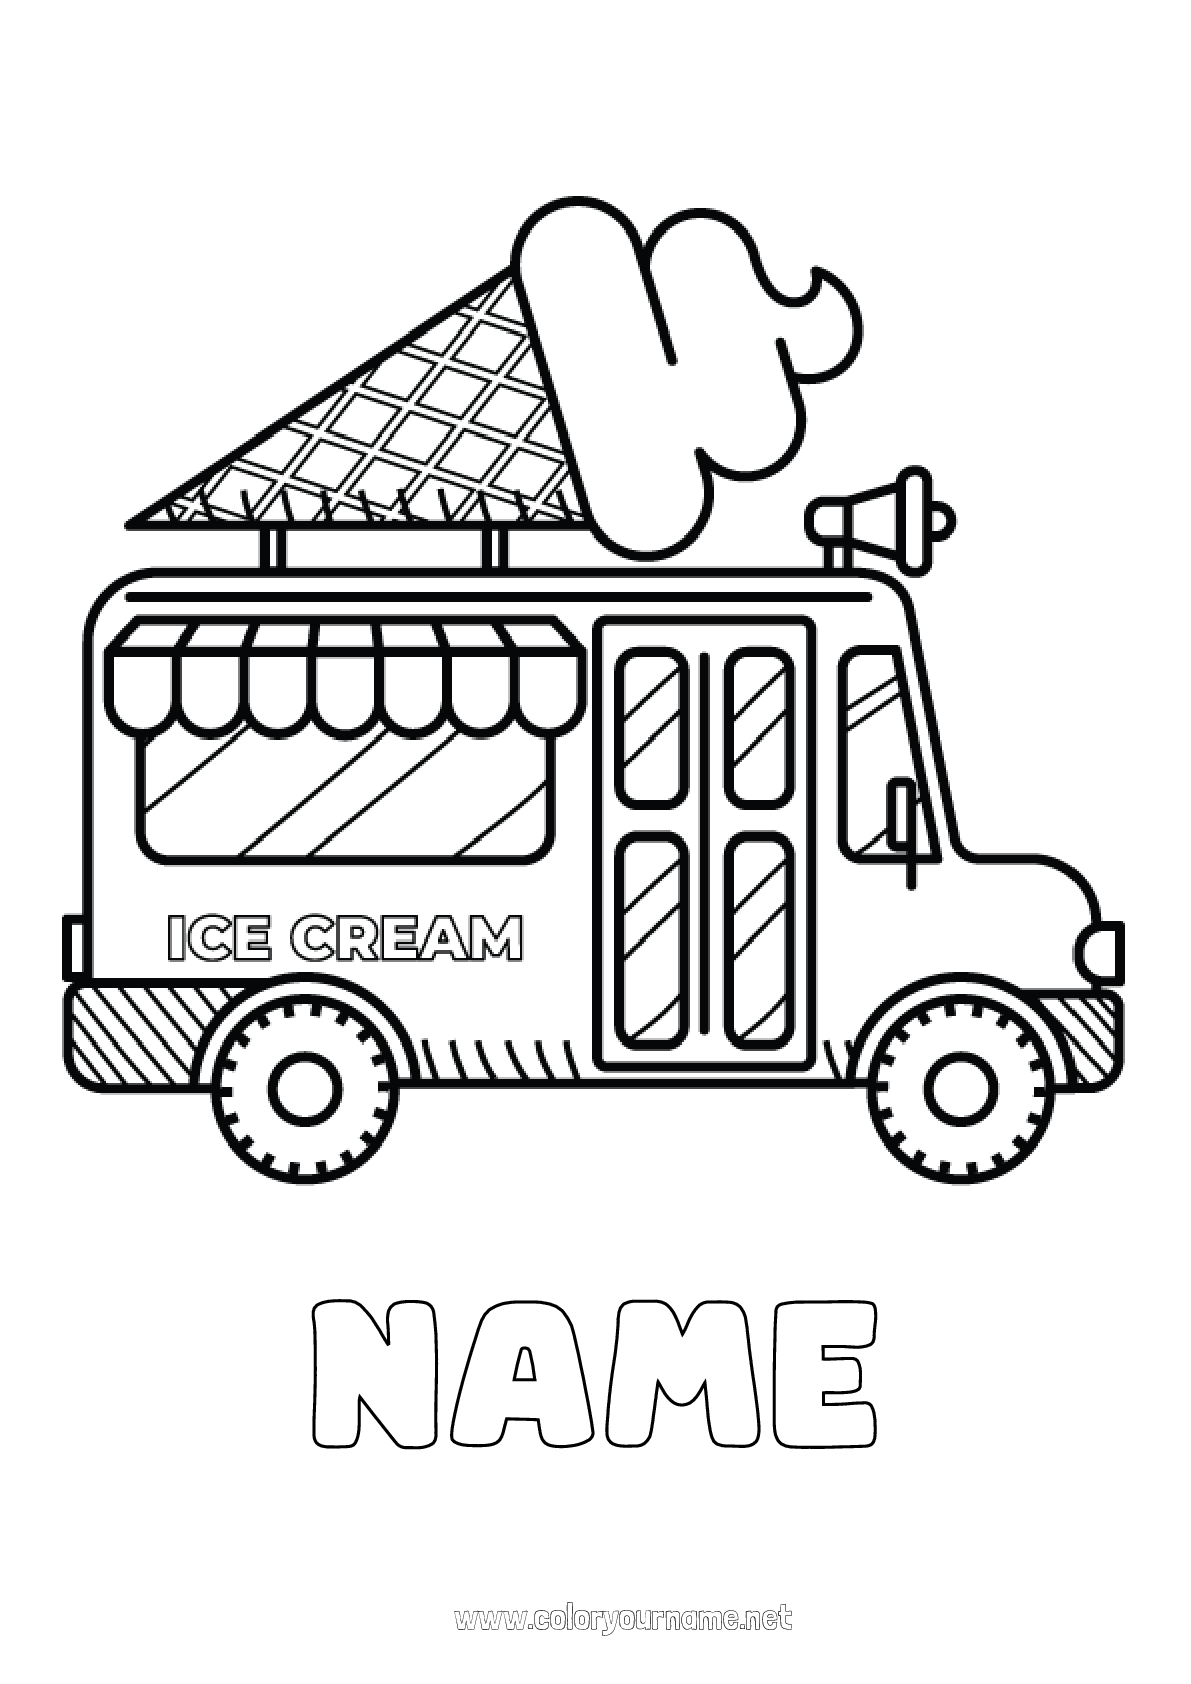 ice cream truck coloring page